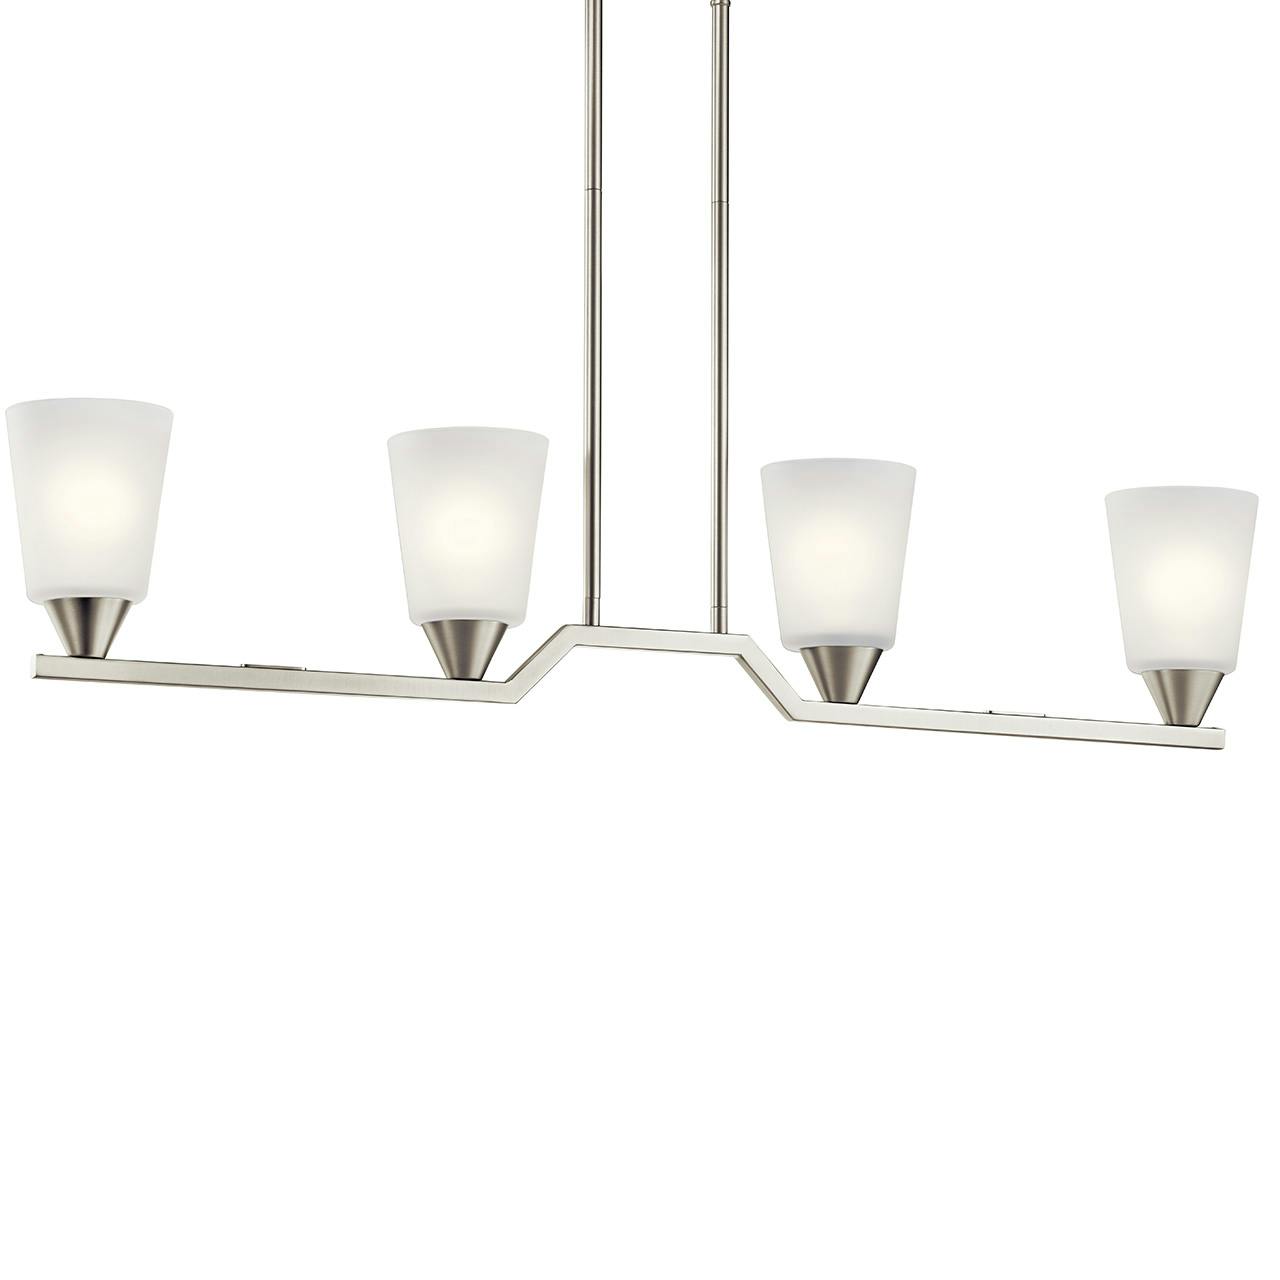 Skagos 4 Light Linear Chandelier Nickel without the canopy on a white background